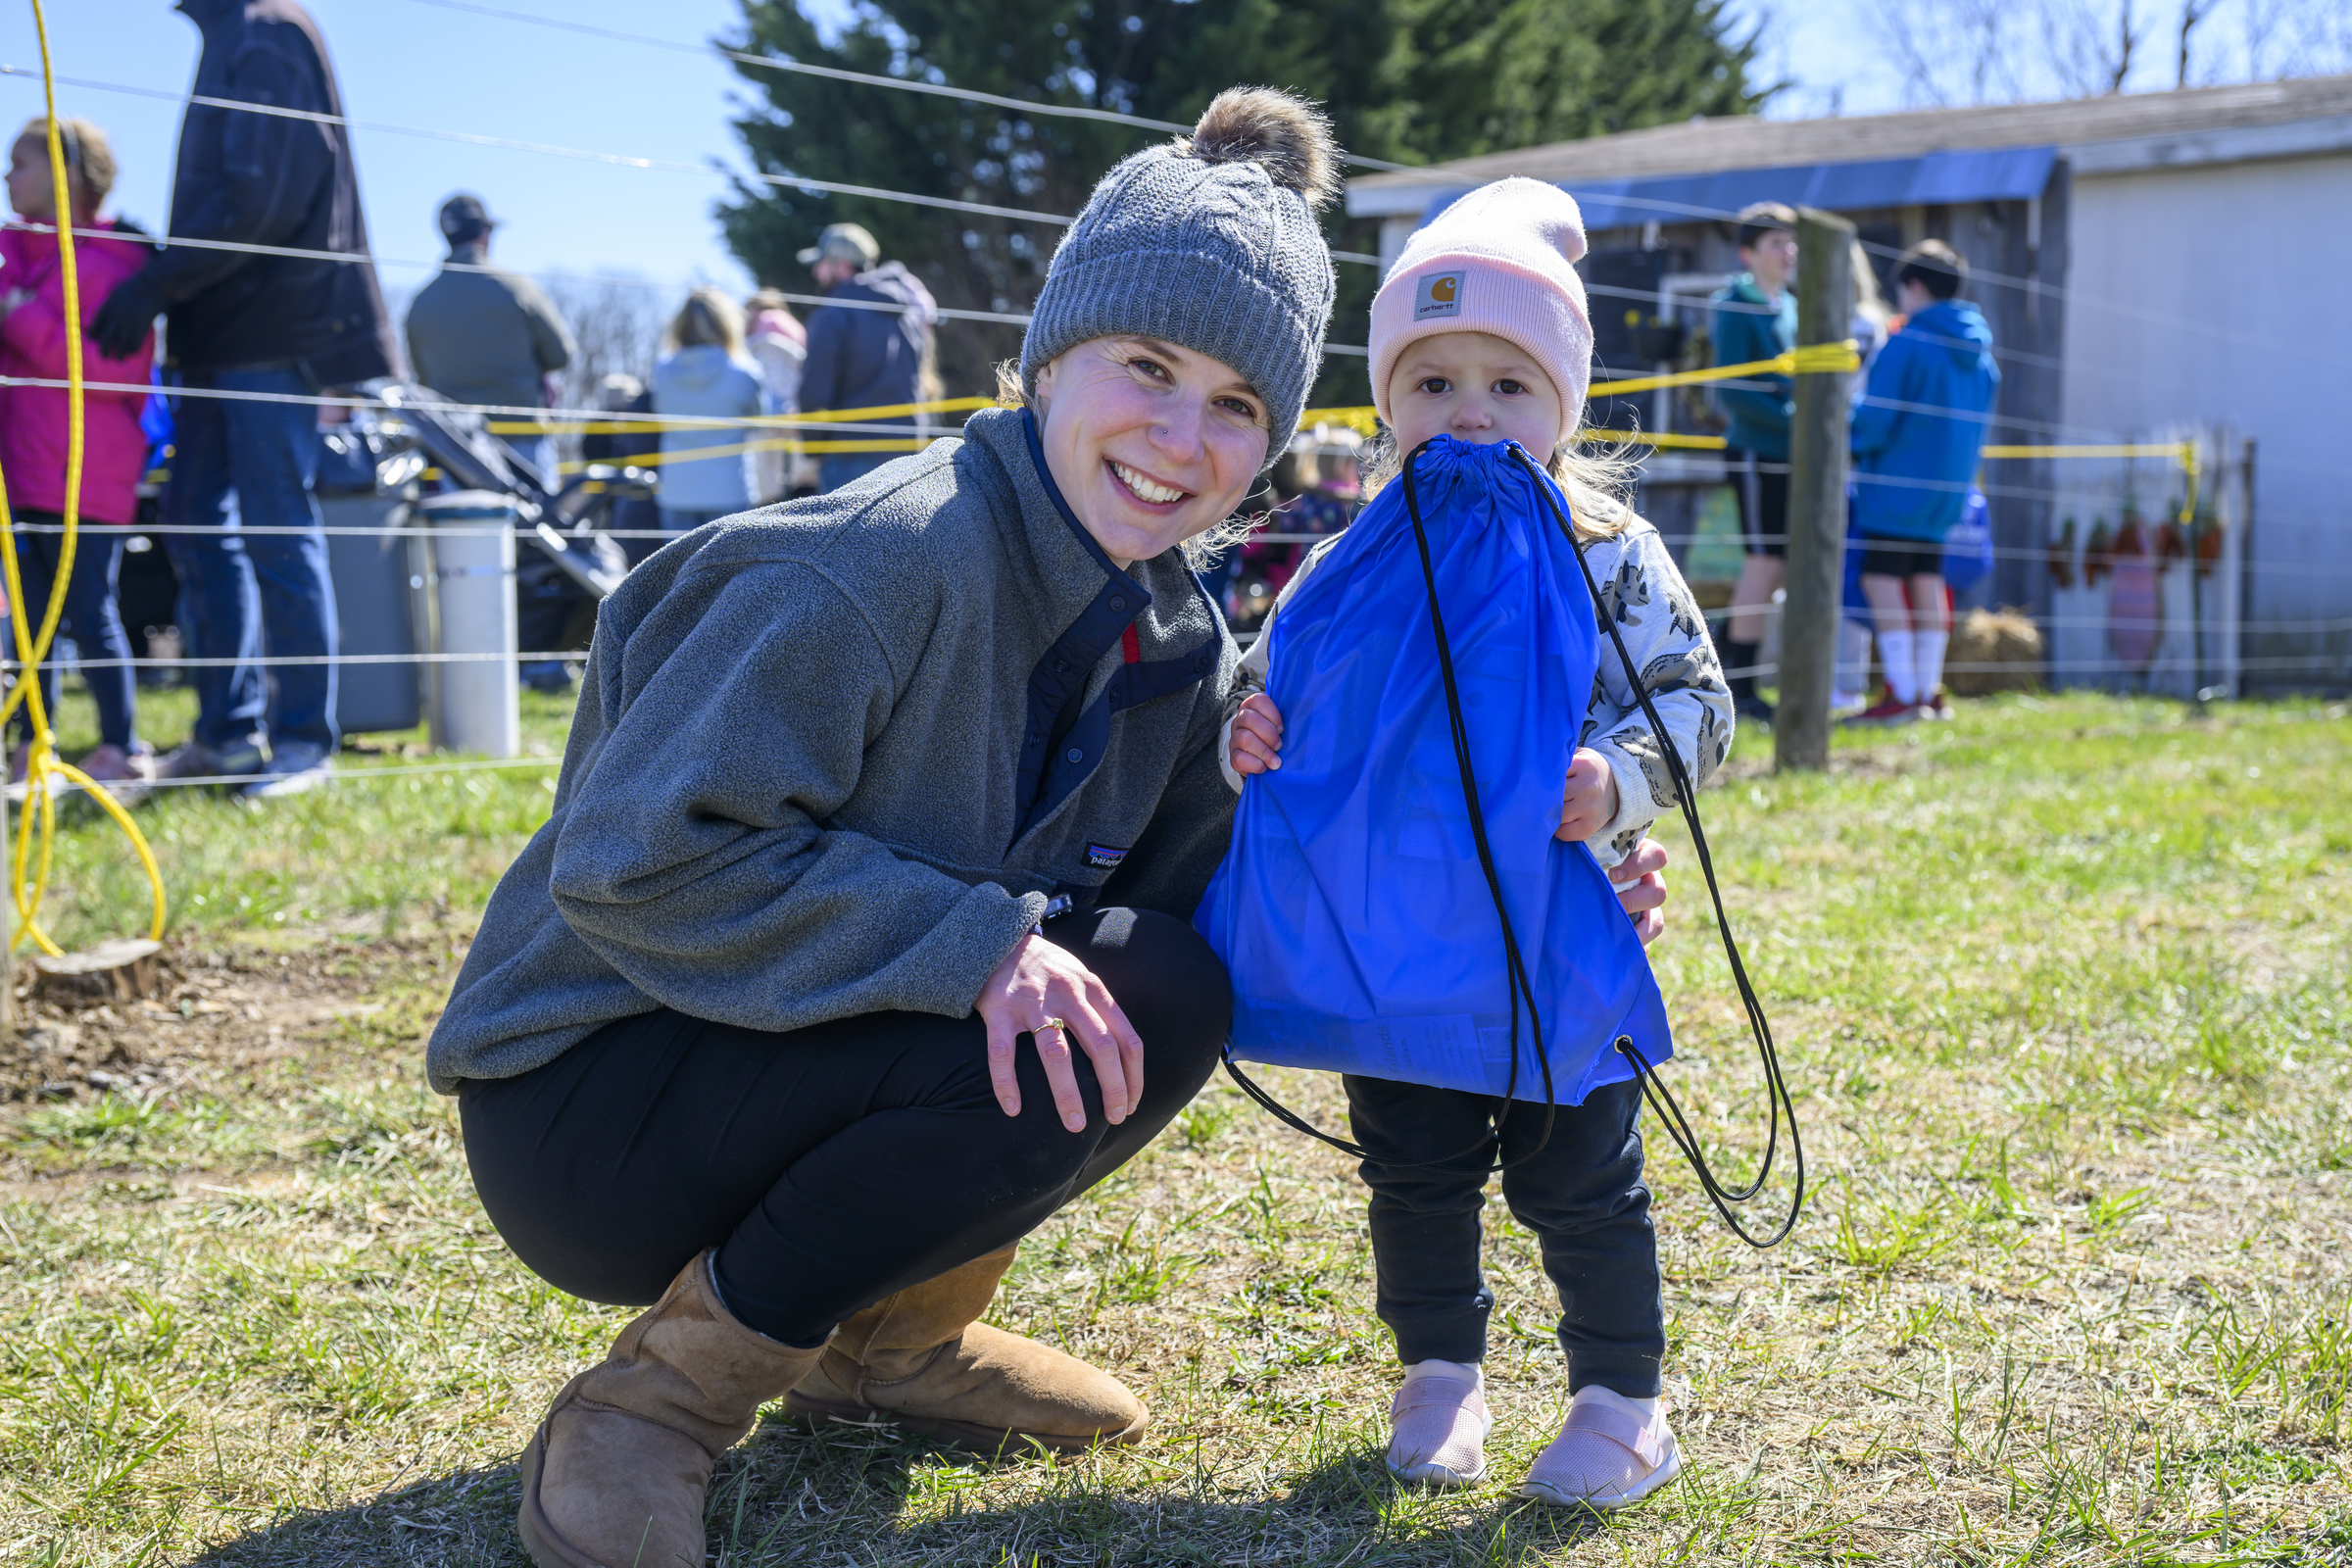 Katie Bogash smiles as her daughter Payton holds on tightly to her gift bag during the Coppermine Eggstravaganza at Cascade Park in Hampstead. (Thomas Walker/Freelance)